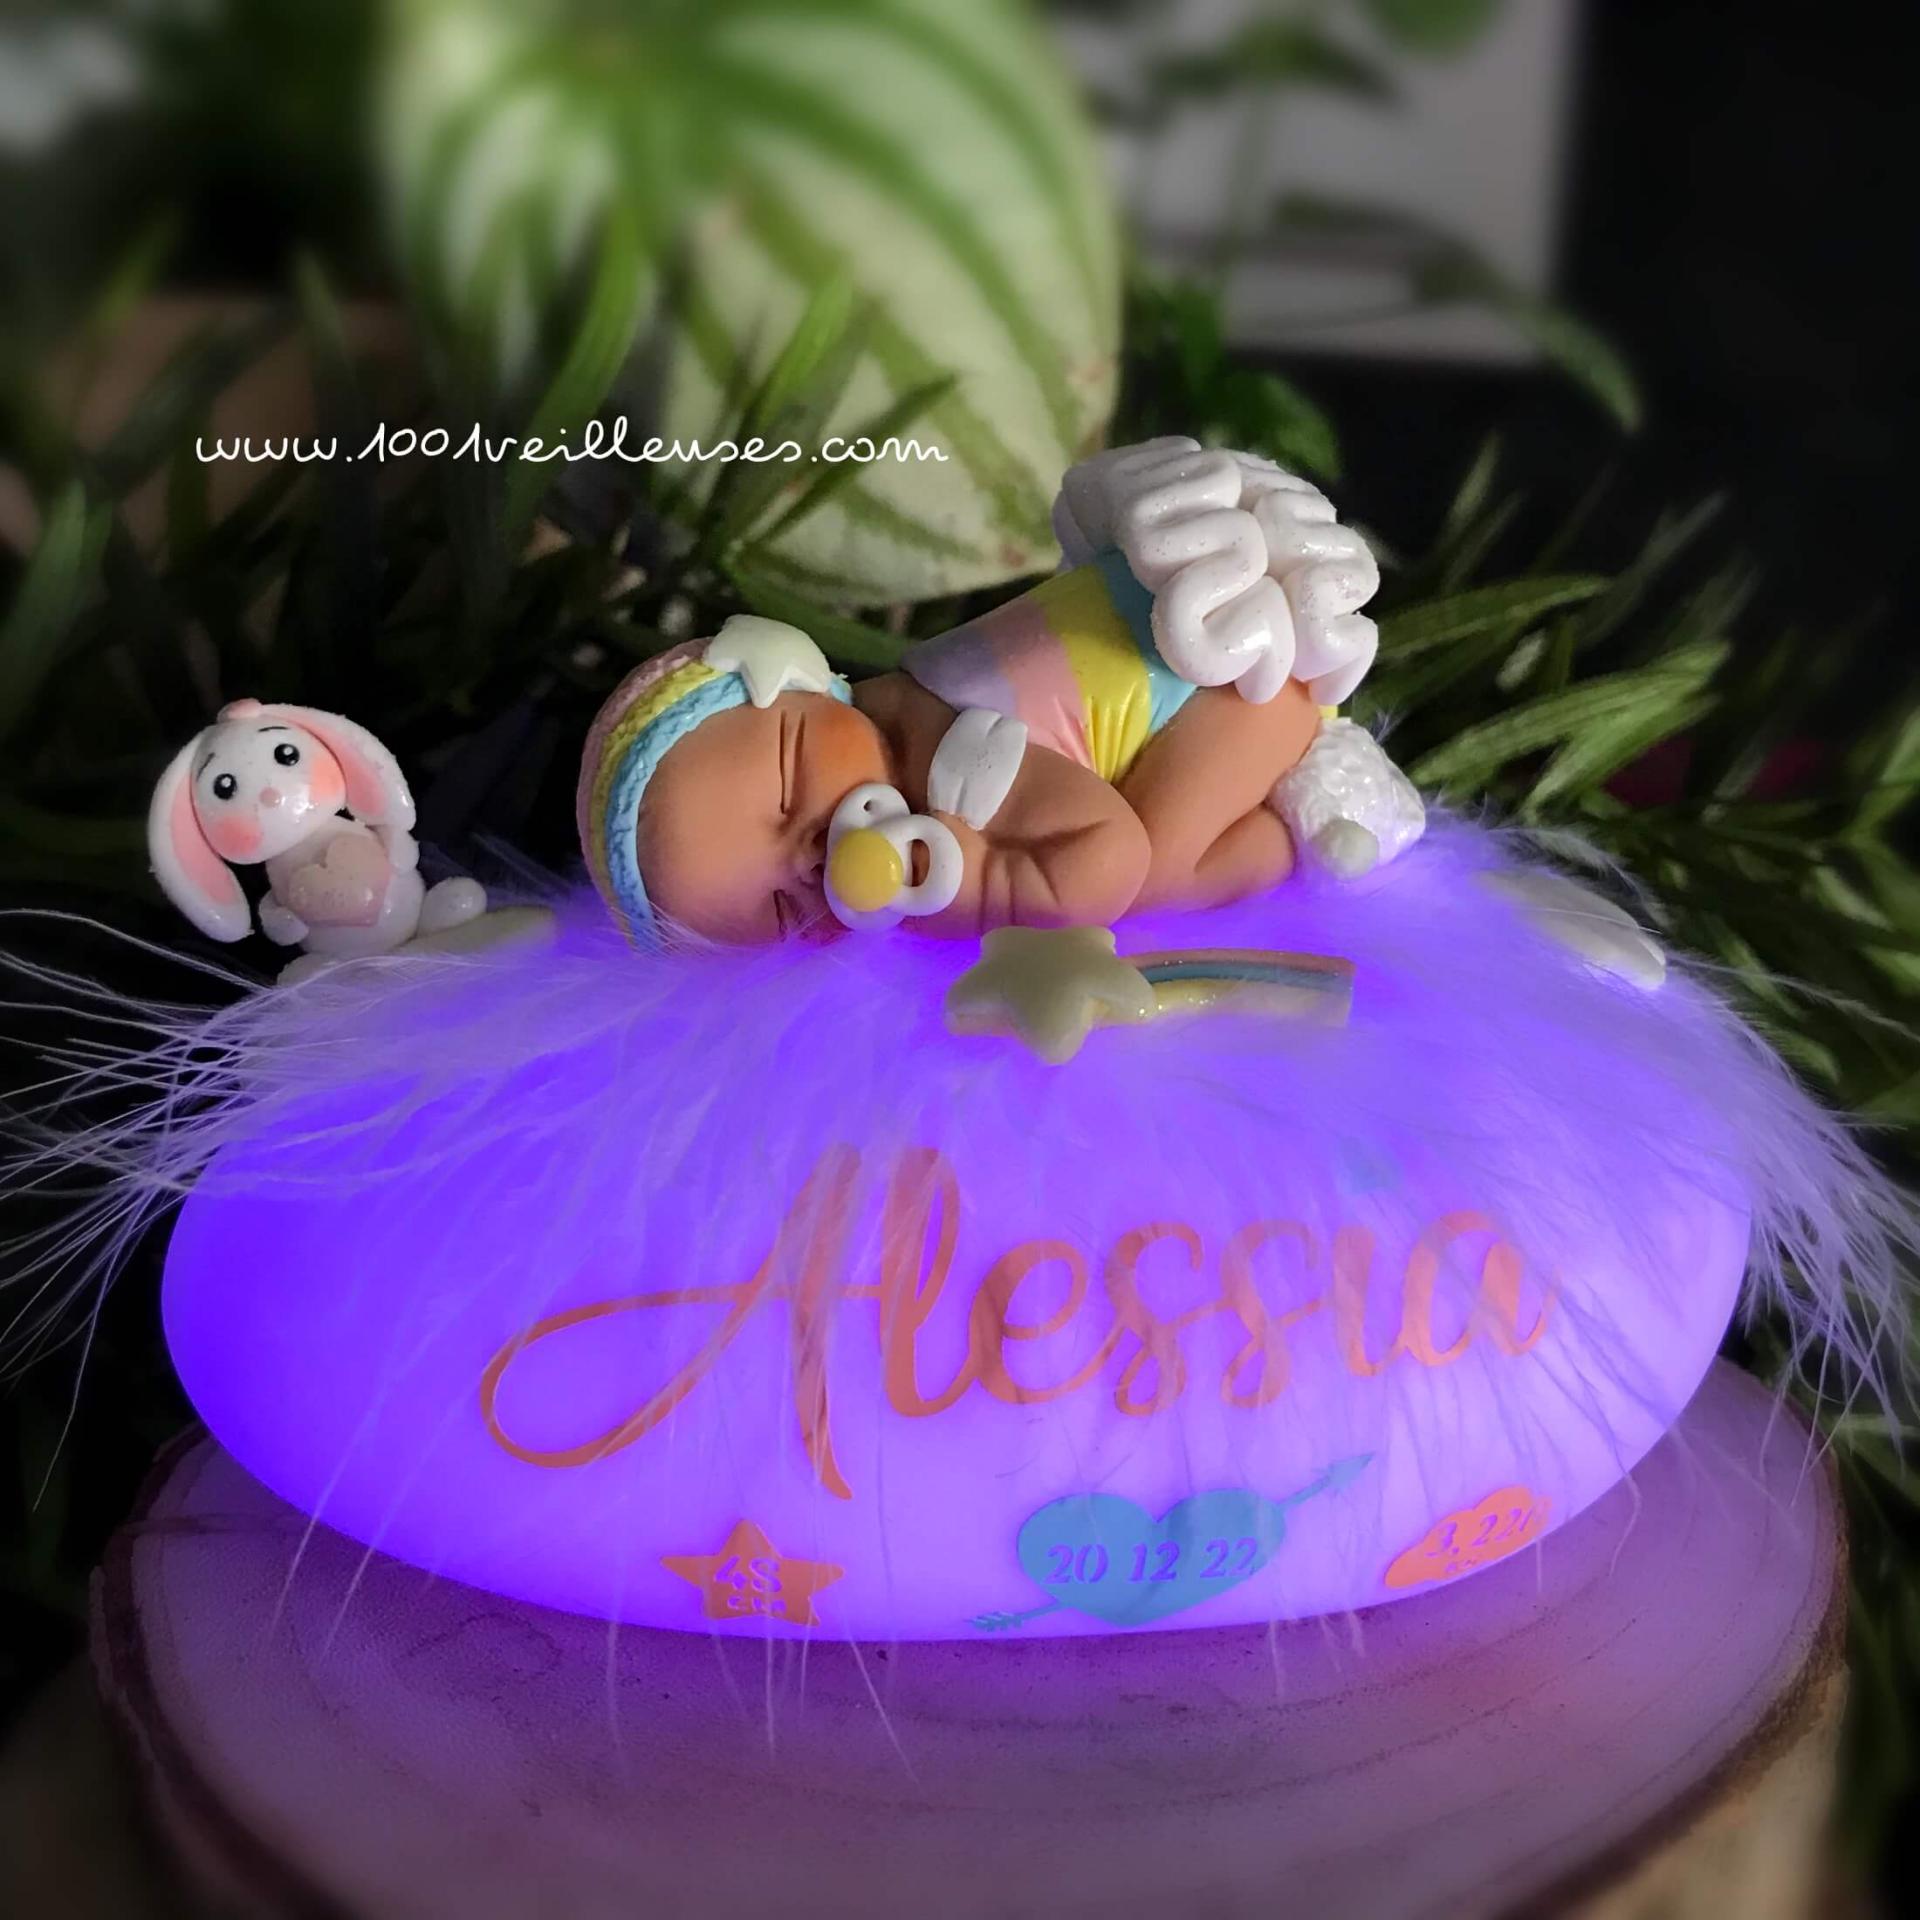 Night light lit with a handmade baby, dressed in rainbow colors, personalized with the name